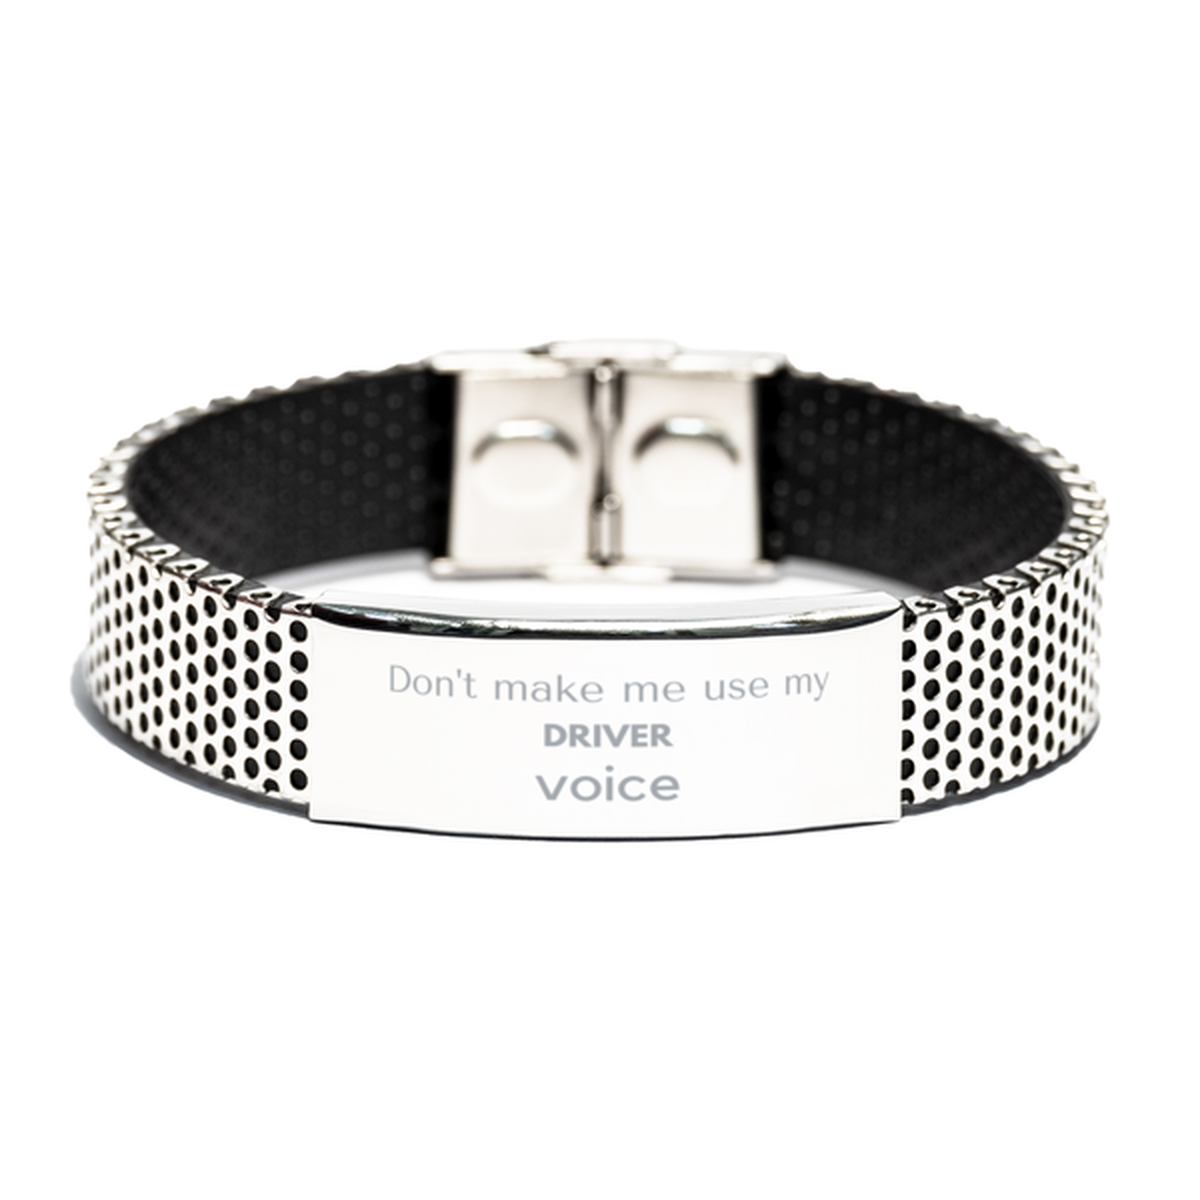 Don't make me use my Driver voice, Sarcasm Driver Gifts, Christmas Driver Stainless Steel Bracelet Birthday Unique Gifts For Driver Coworkers, Men, Women, Colleague, Friends